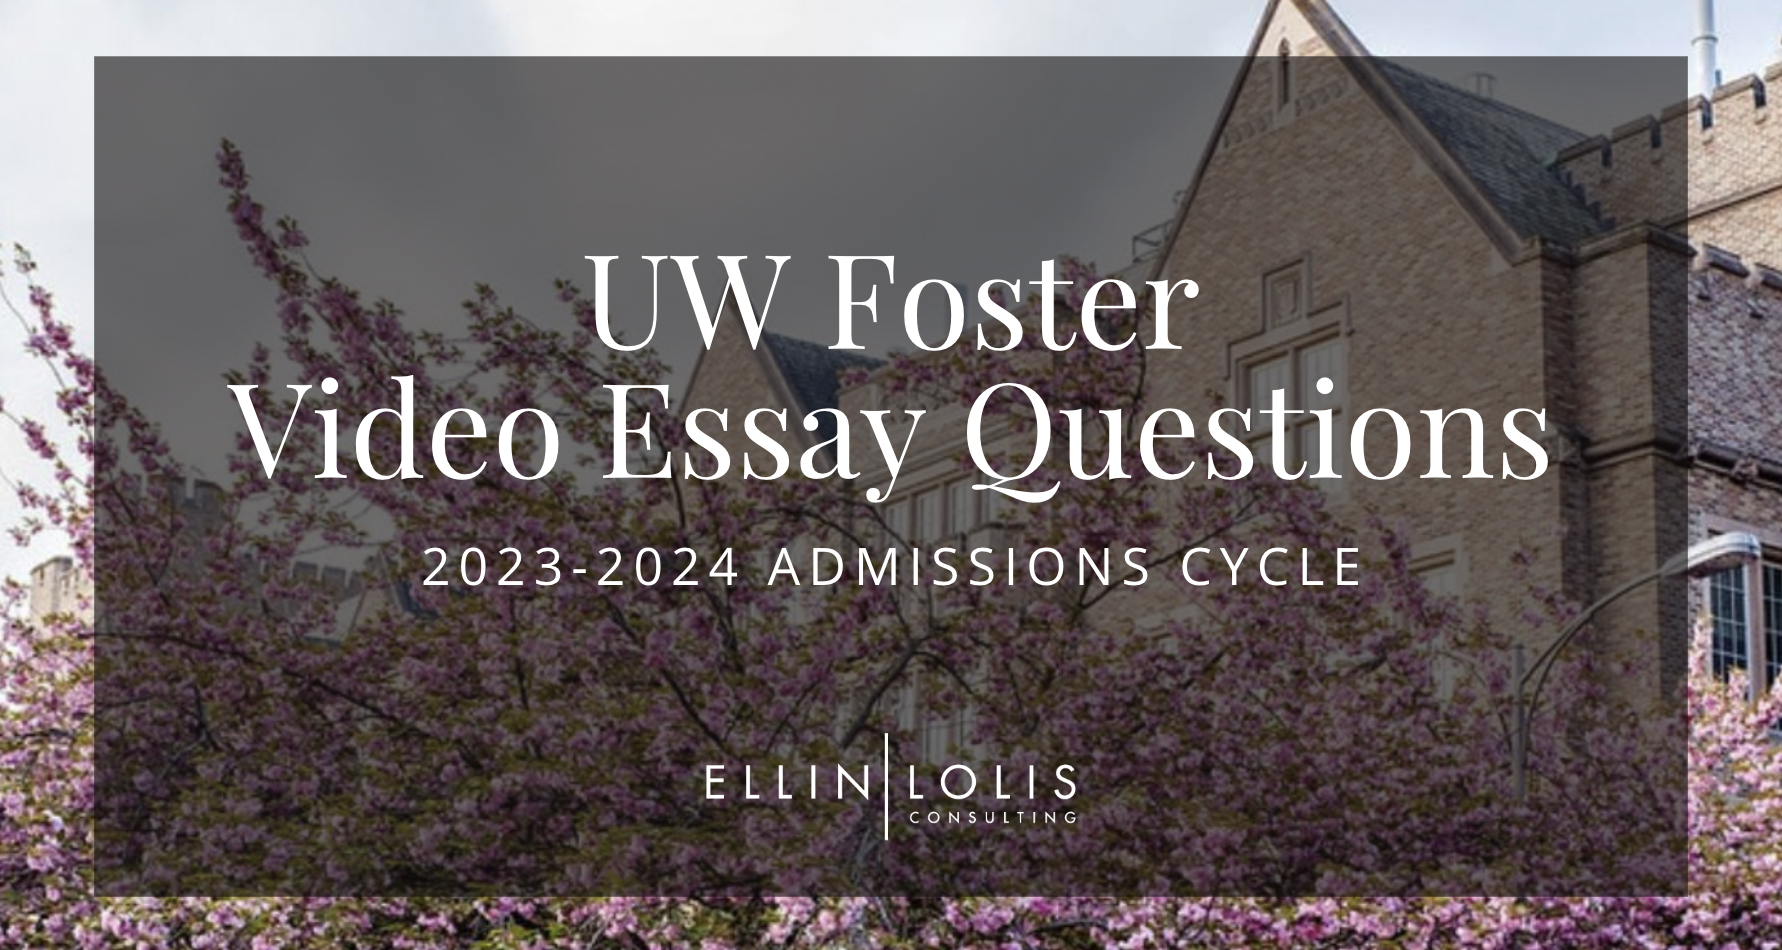 The UW Foster MBA Video Essay Questions – And How to Successfully Answer Them